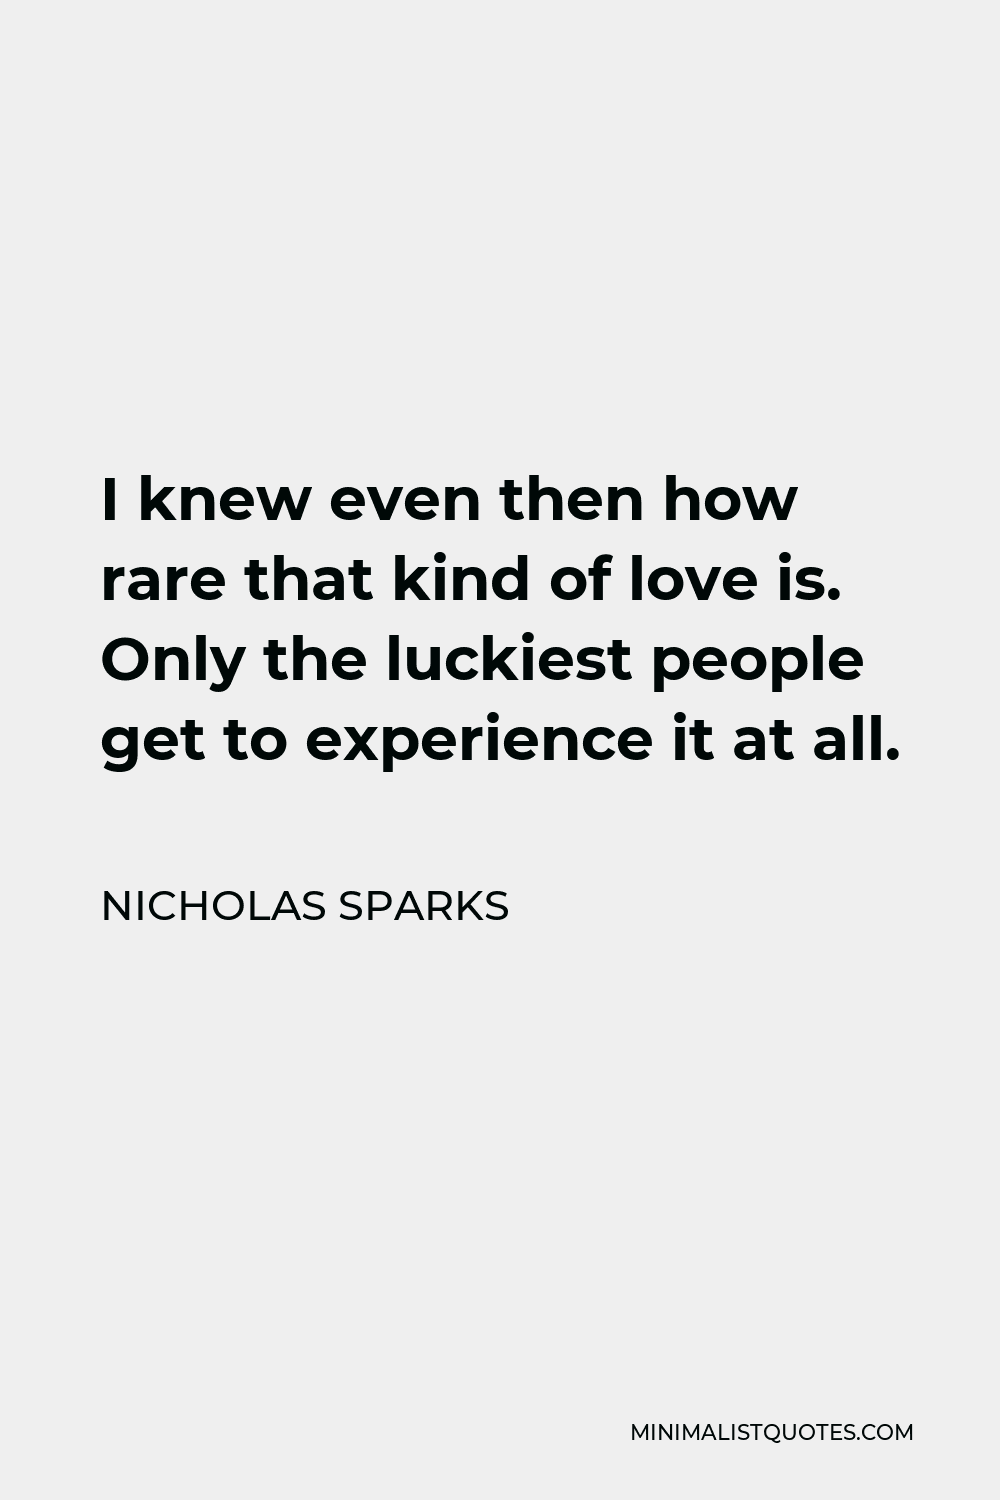 Nicholas Sparks Quote - I knew even then how rare that kind of love is. Only the luckiest people get to experience it at all.